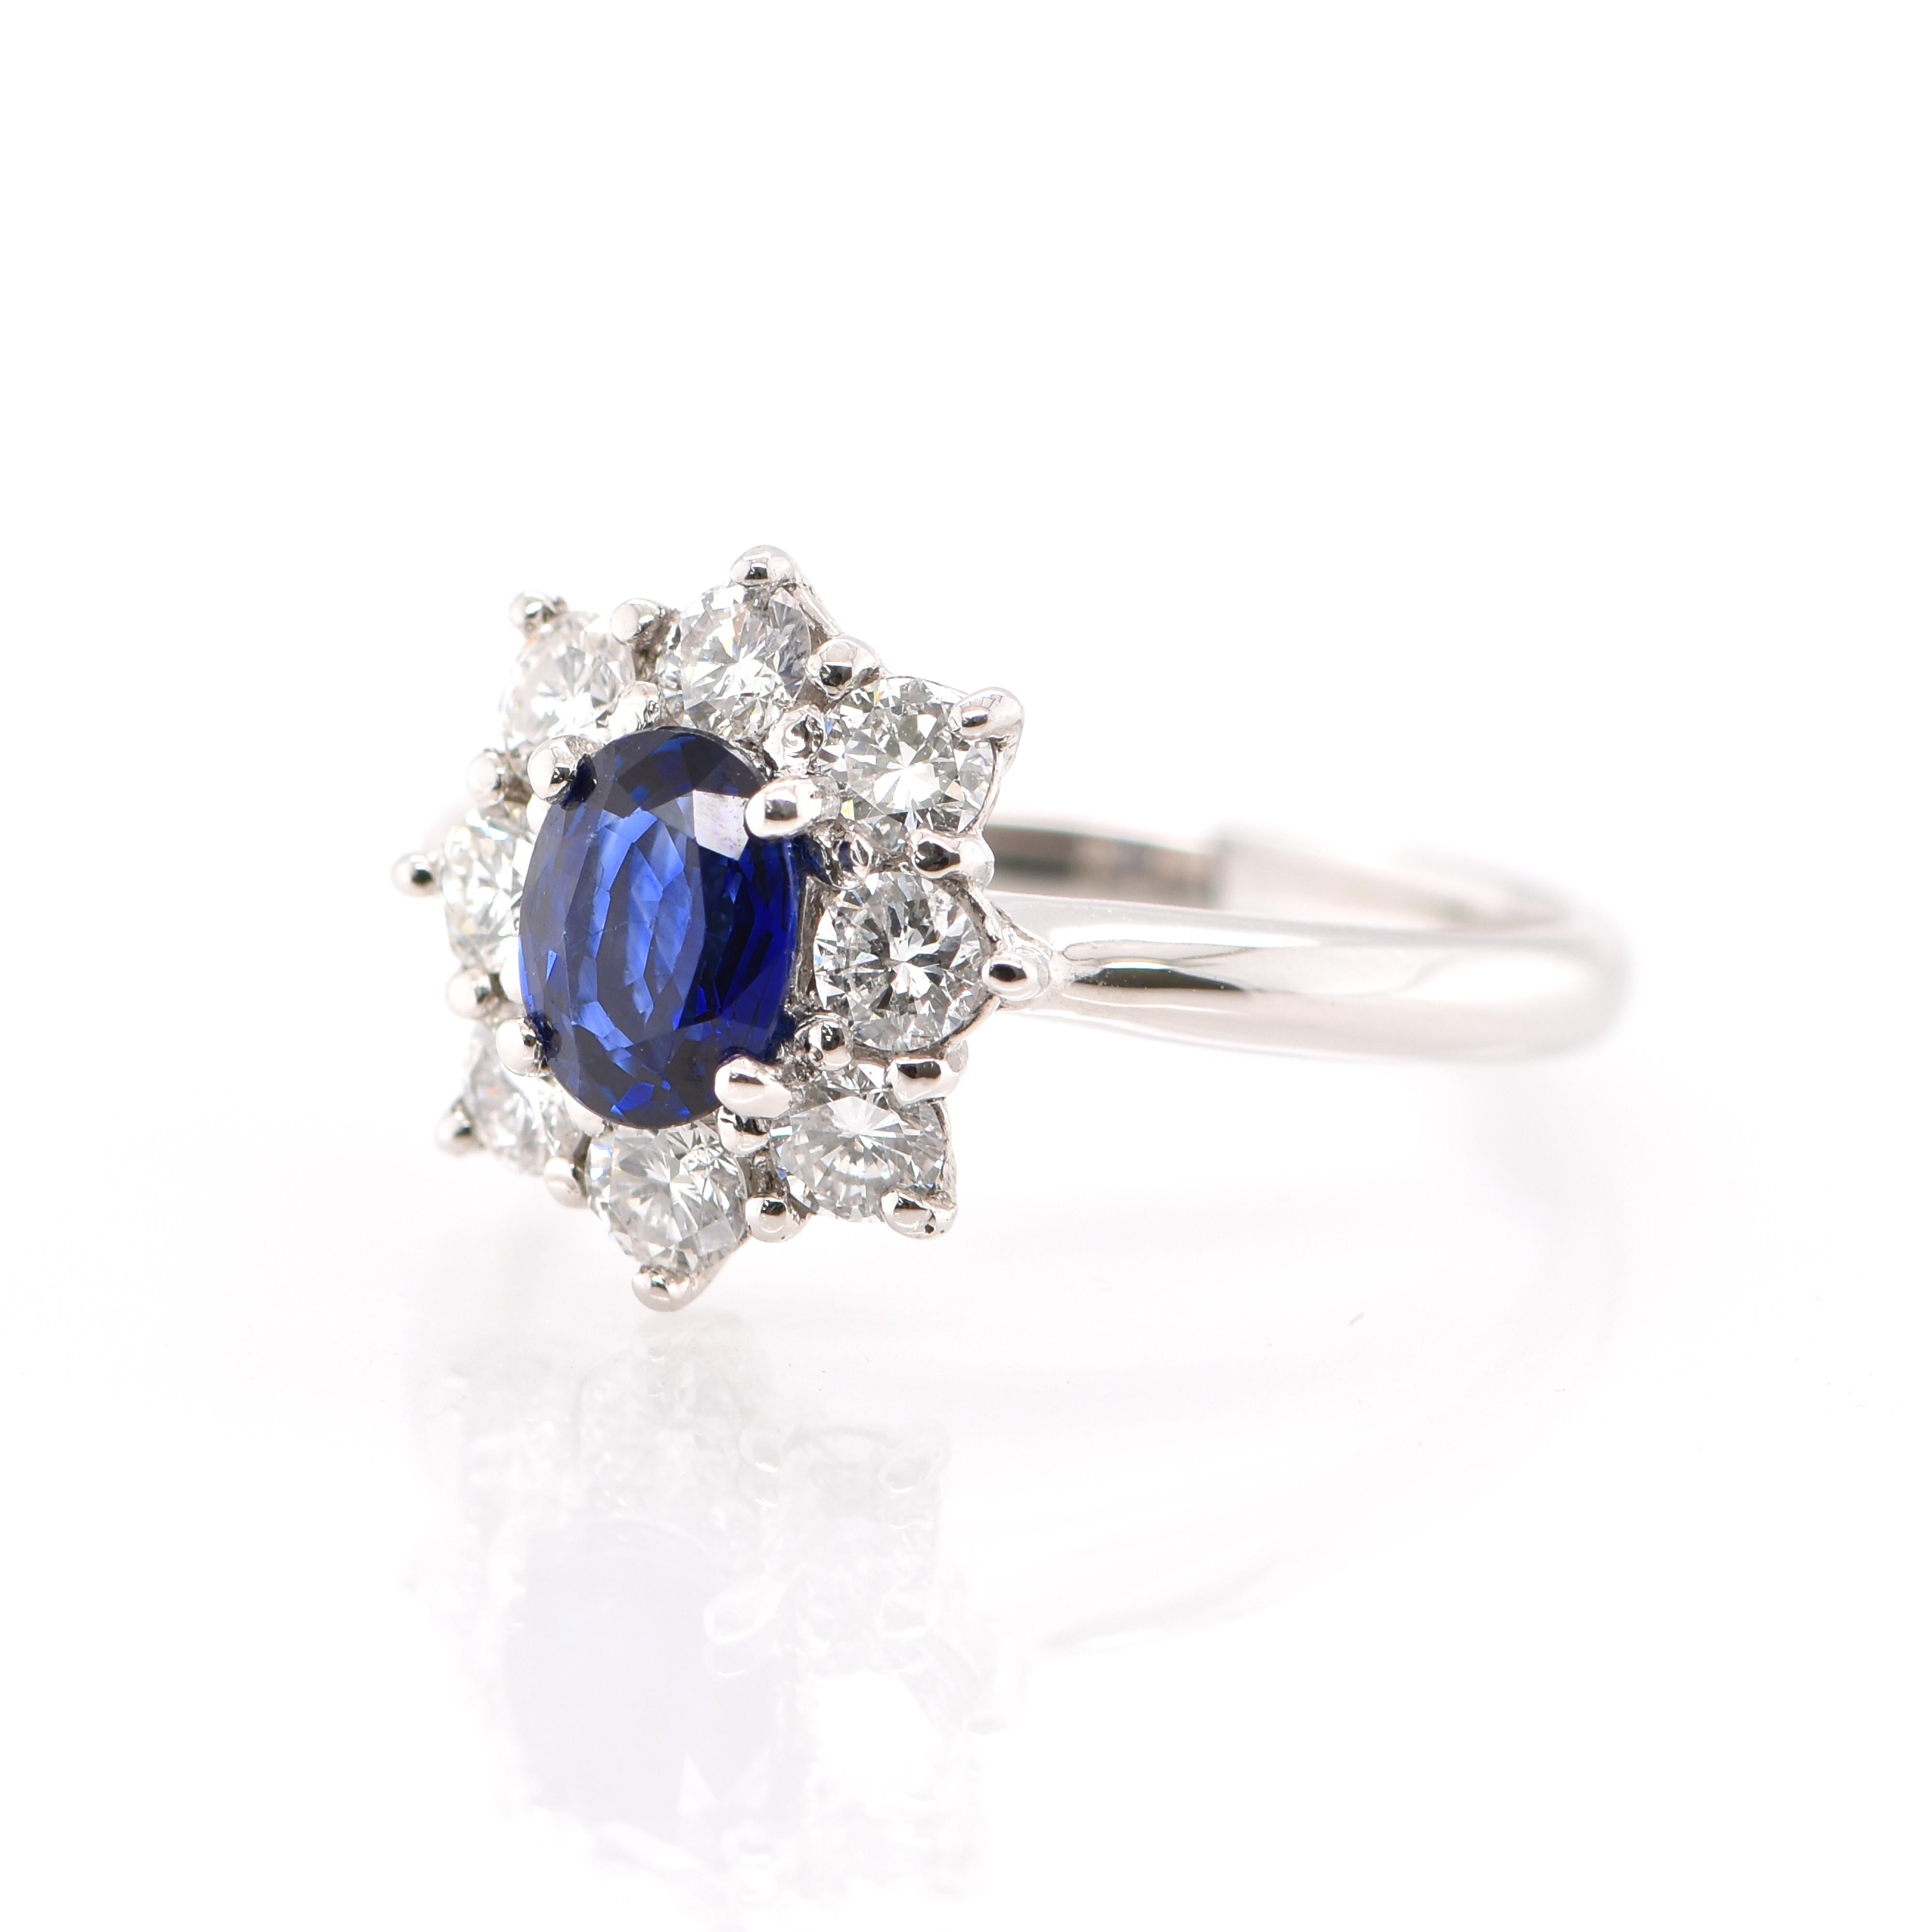 A stunning Halo Engagement Ring featuring a 0.77 Carat Natural Sapphire and 0.60 Carats of Diamond Accents set in Platinum. Sapphires have extraordinary durability - they excel in hardness as well as toughness and durability making them very popular